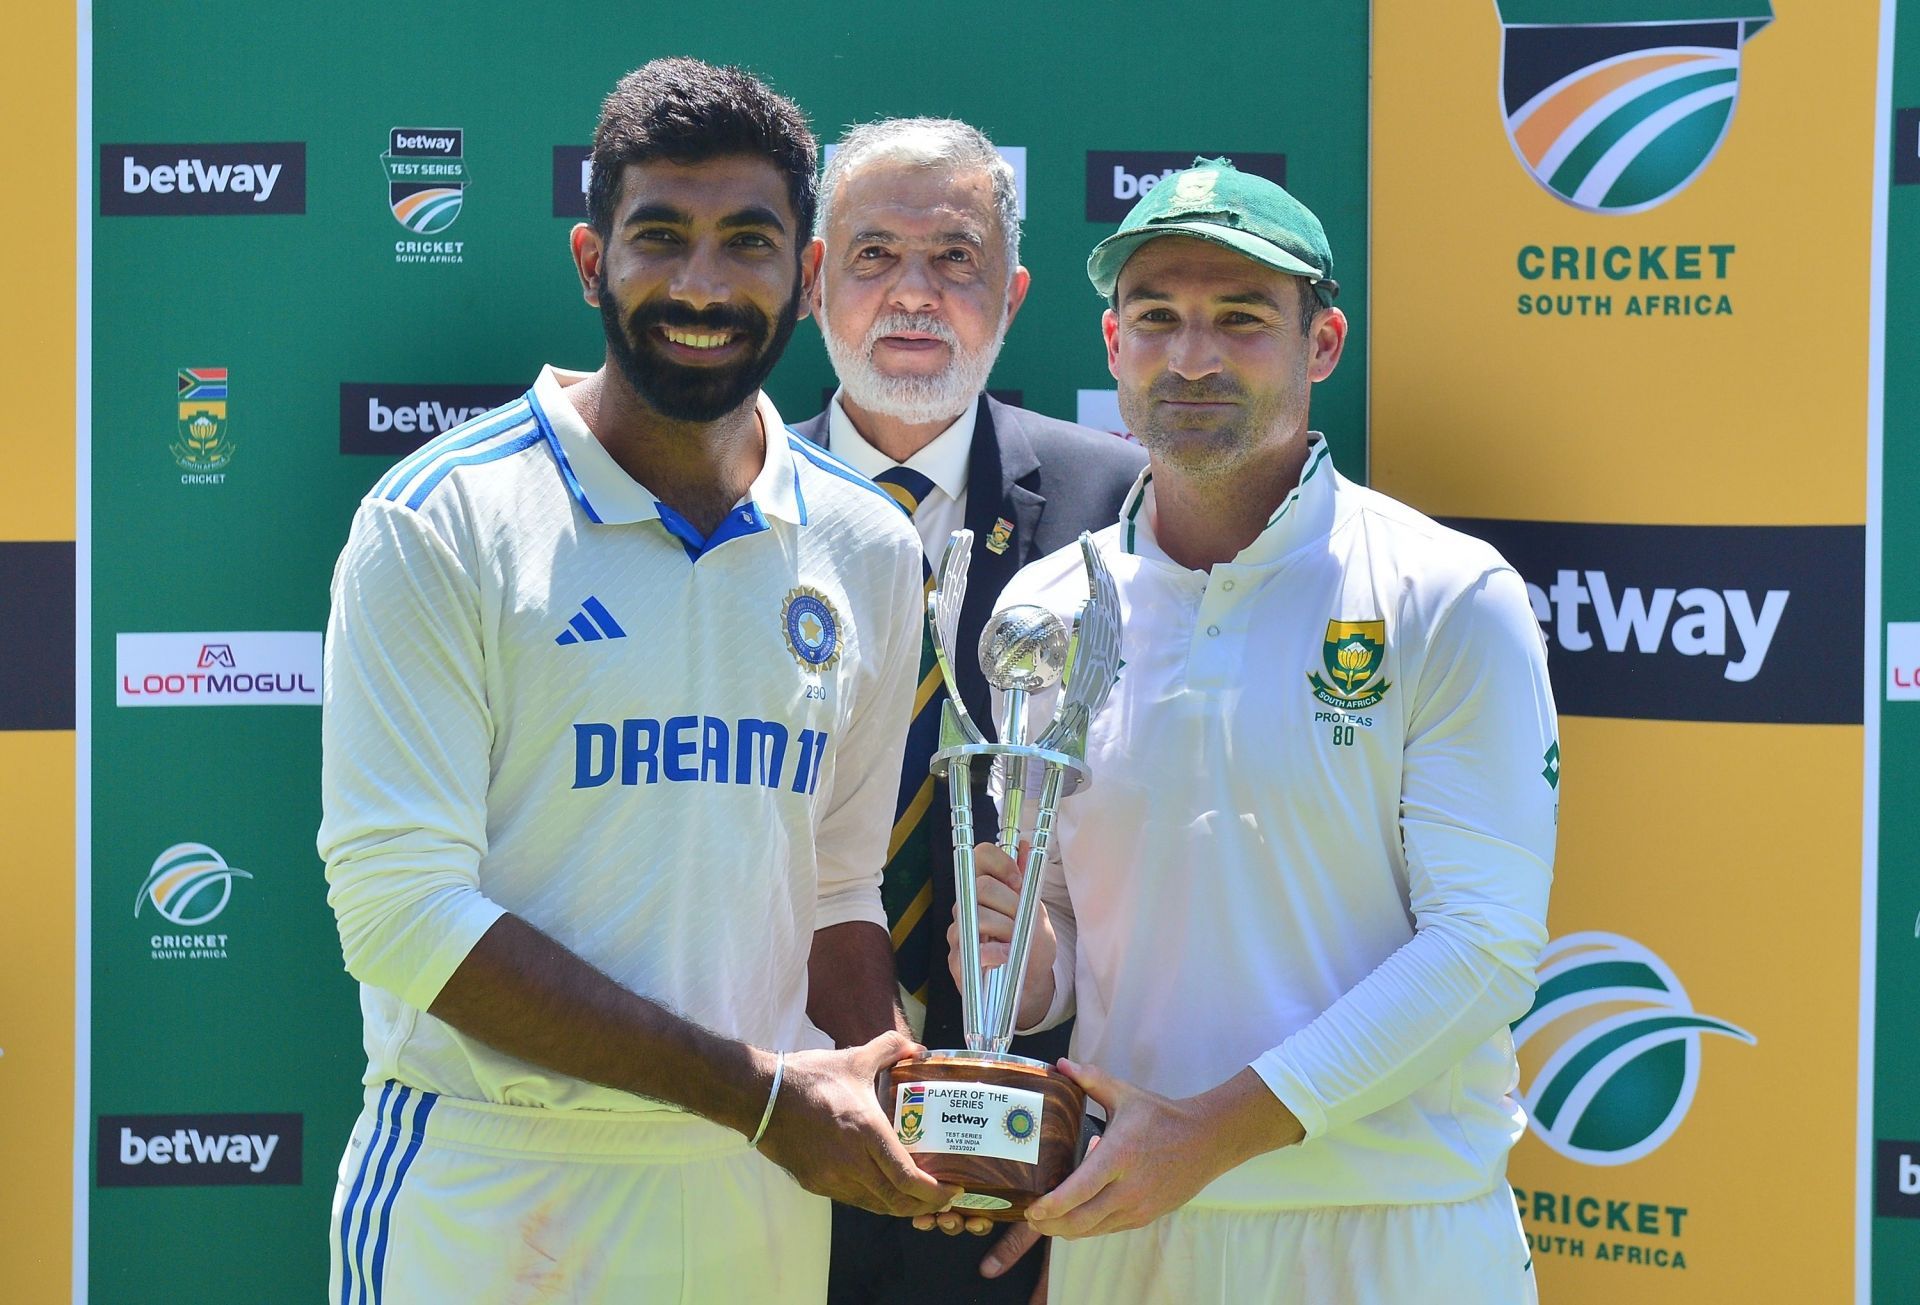 Jasprit Bumrah (left) and Dean Elgar were jointly awarded the Player of the Series. [P/C: Getty]